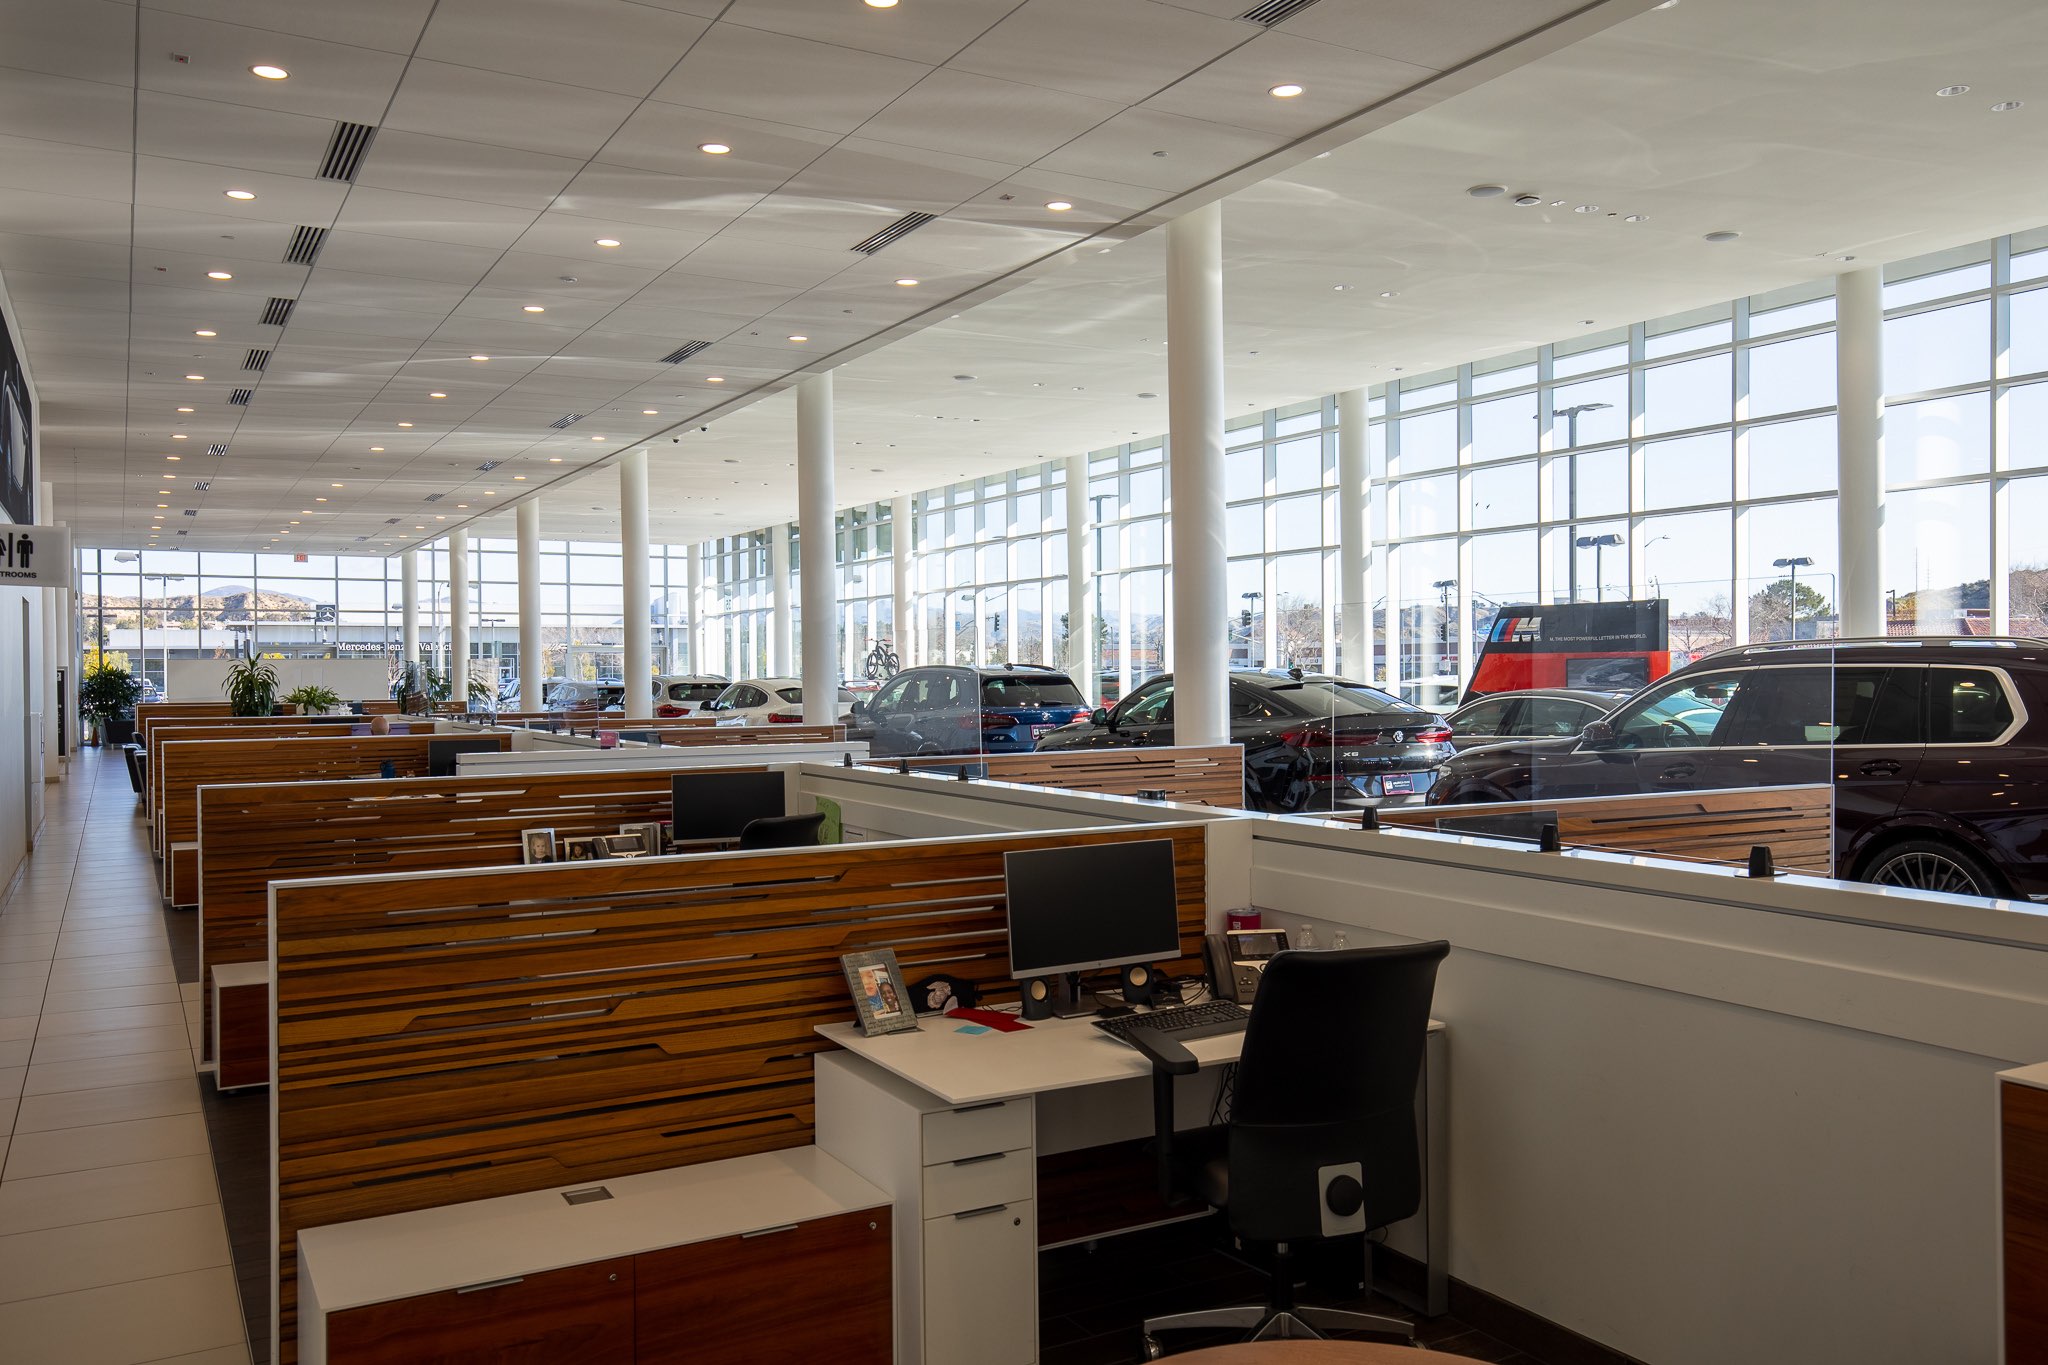 Interior view of Valencia BMW, focused on bays of desks with chairs.